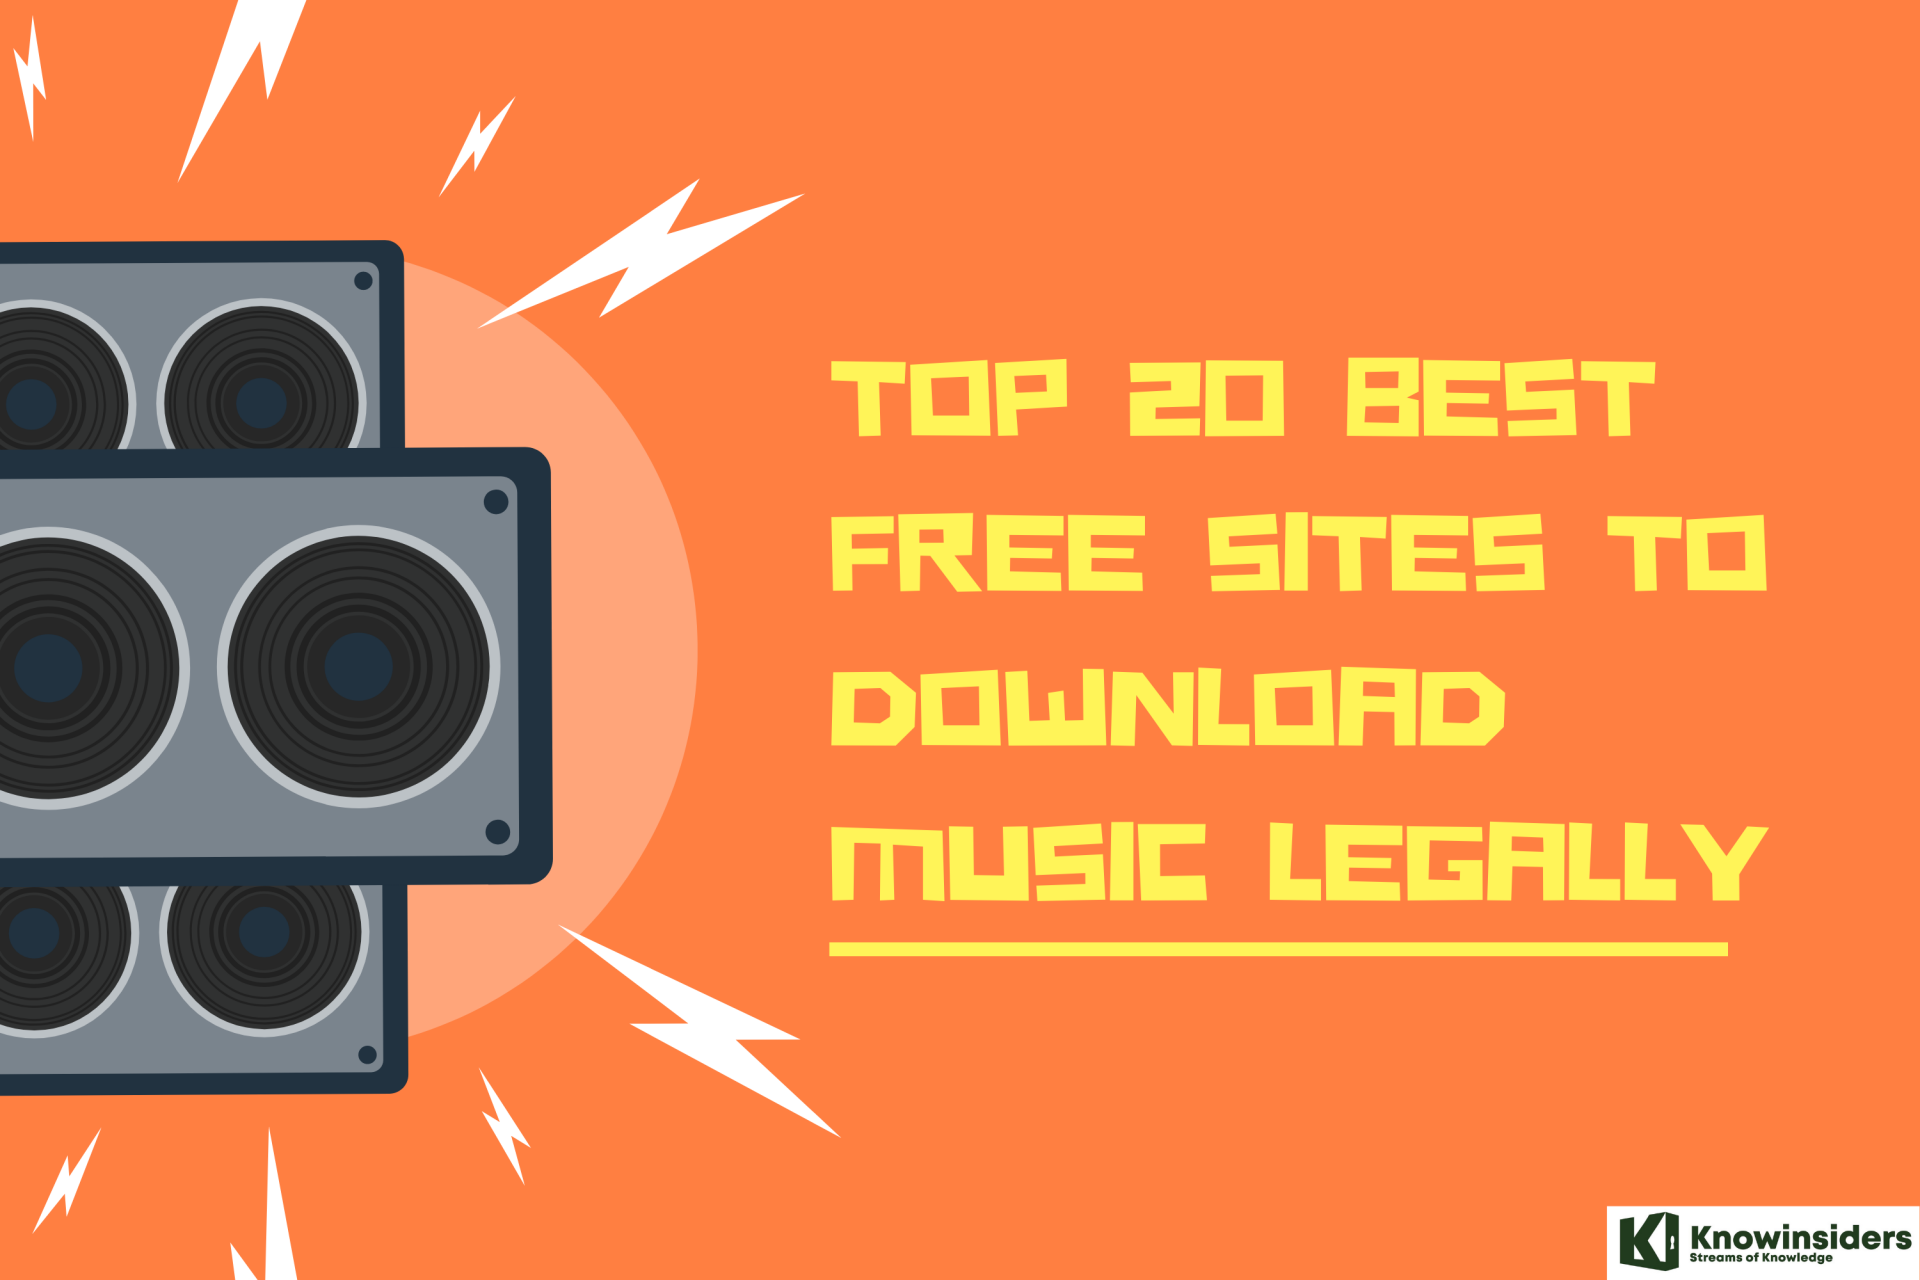 Top 20 Best Free Sites To Download Music Legally